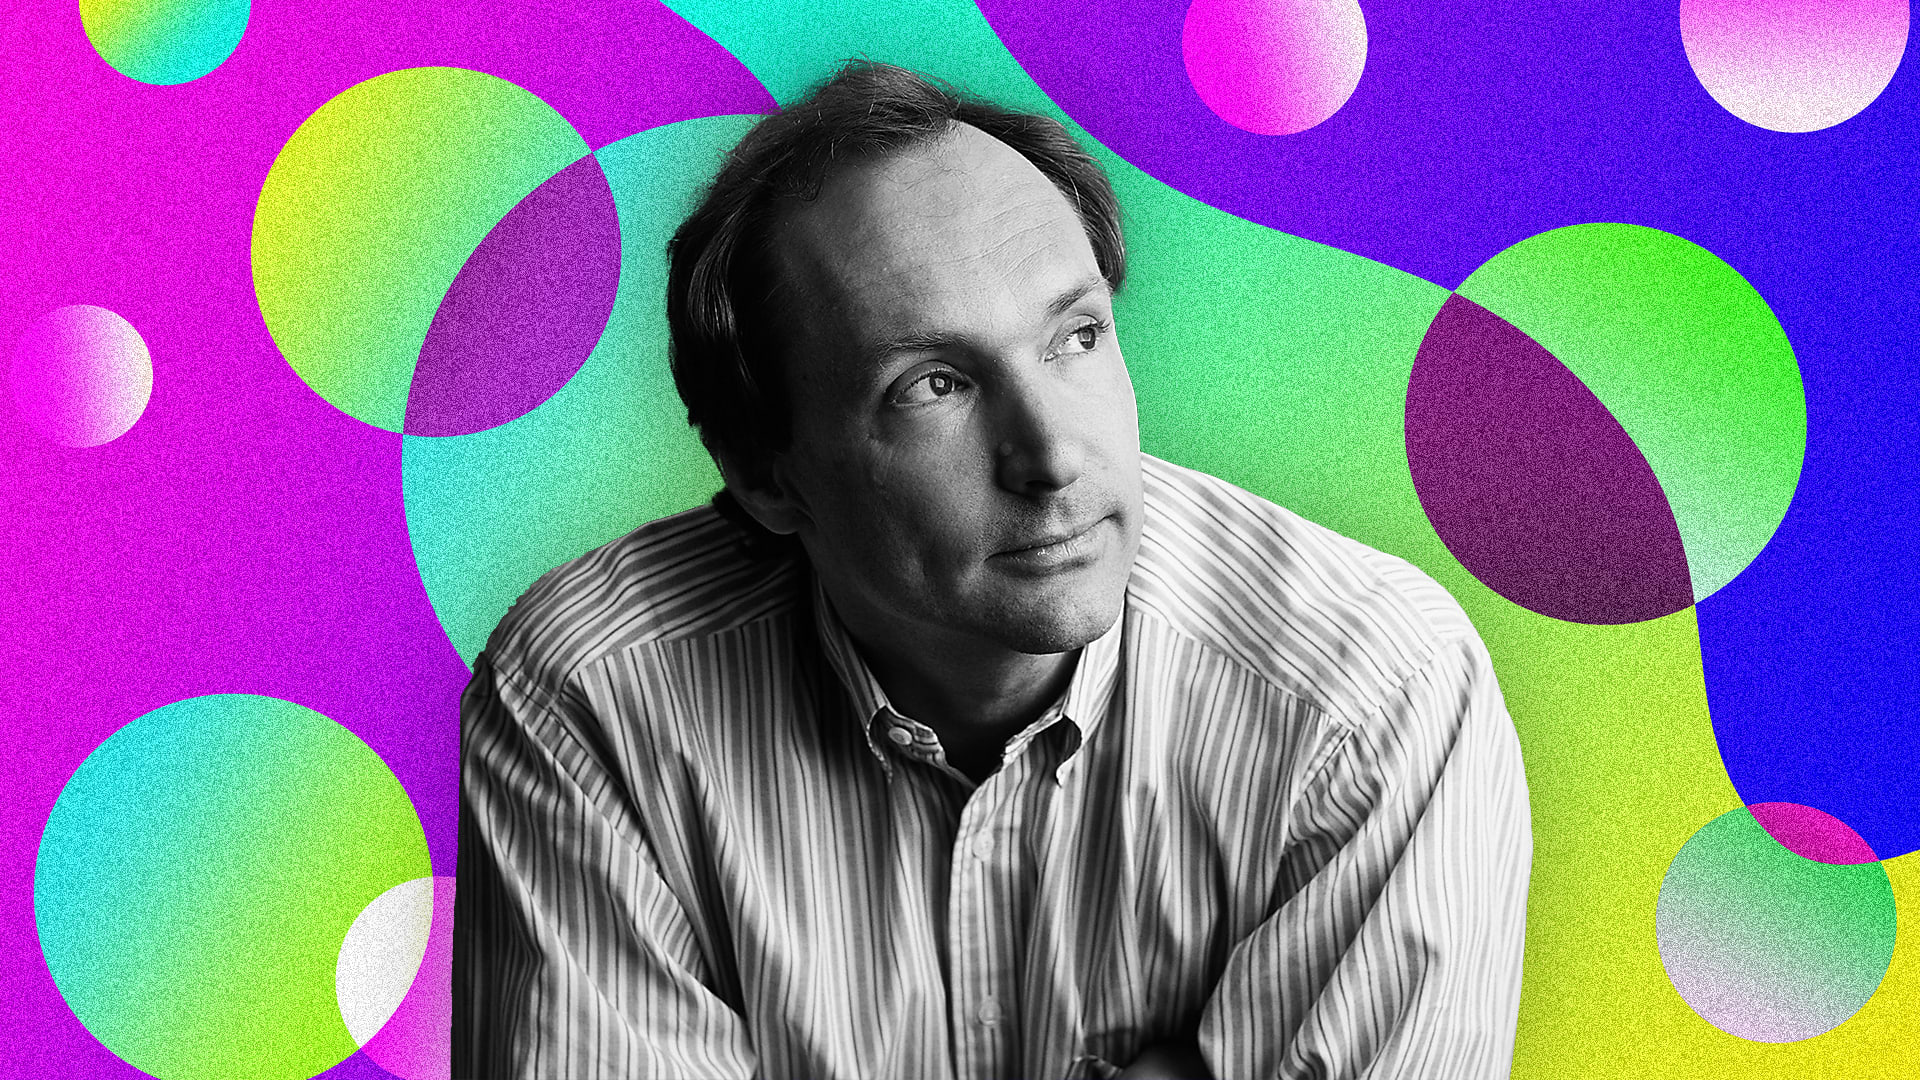 Tim Berners-Lee, who gave us the web, is selling his code—as an NFT